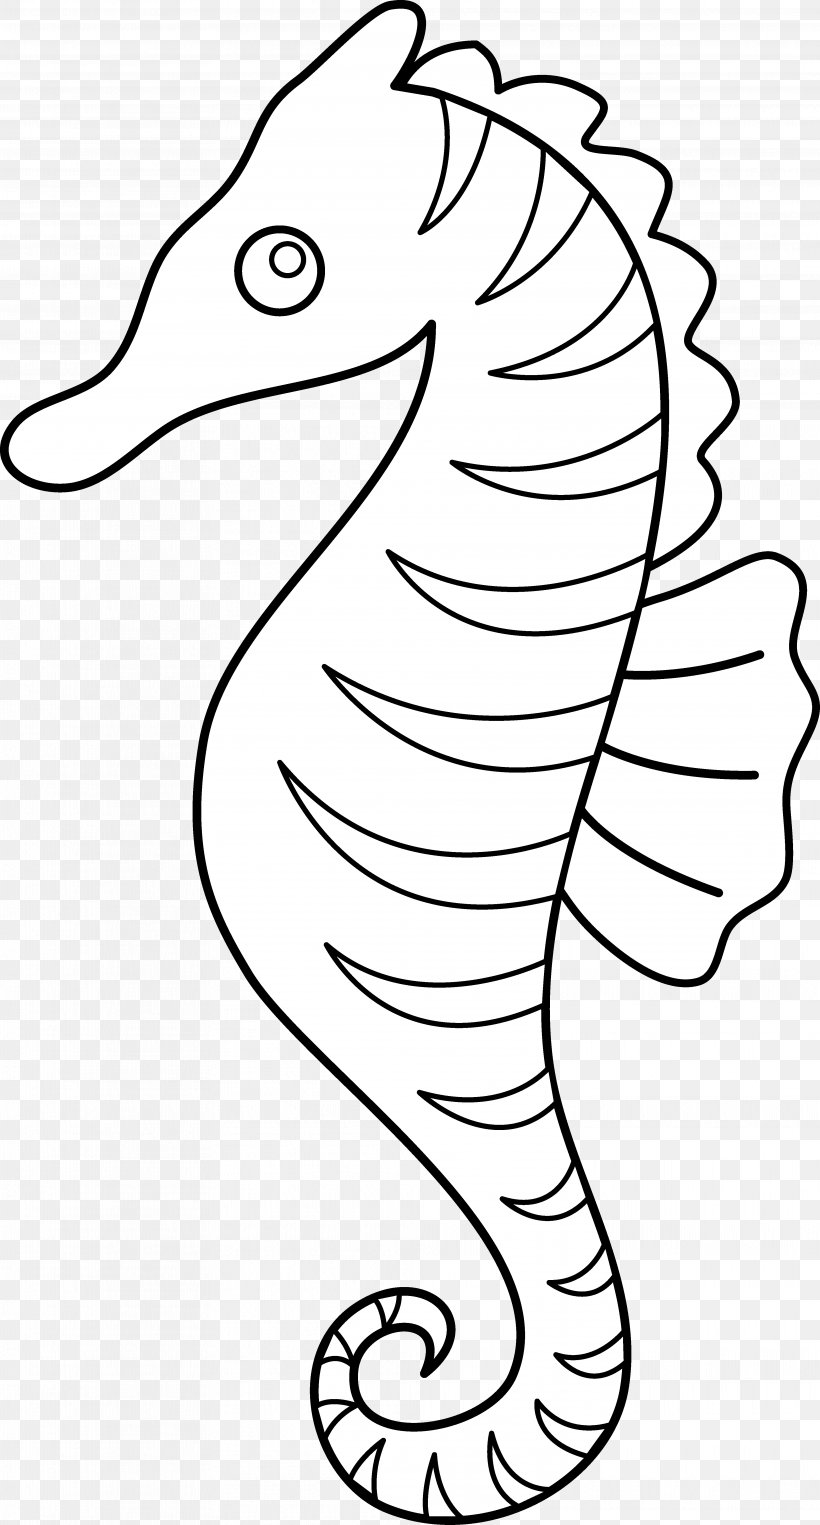 Seahorse Line Art Clip Art, PNG, 3951x7351px, Seahorse, Beak, Black And White, Cartoon, Coloring Book Download Free